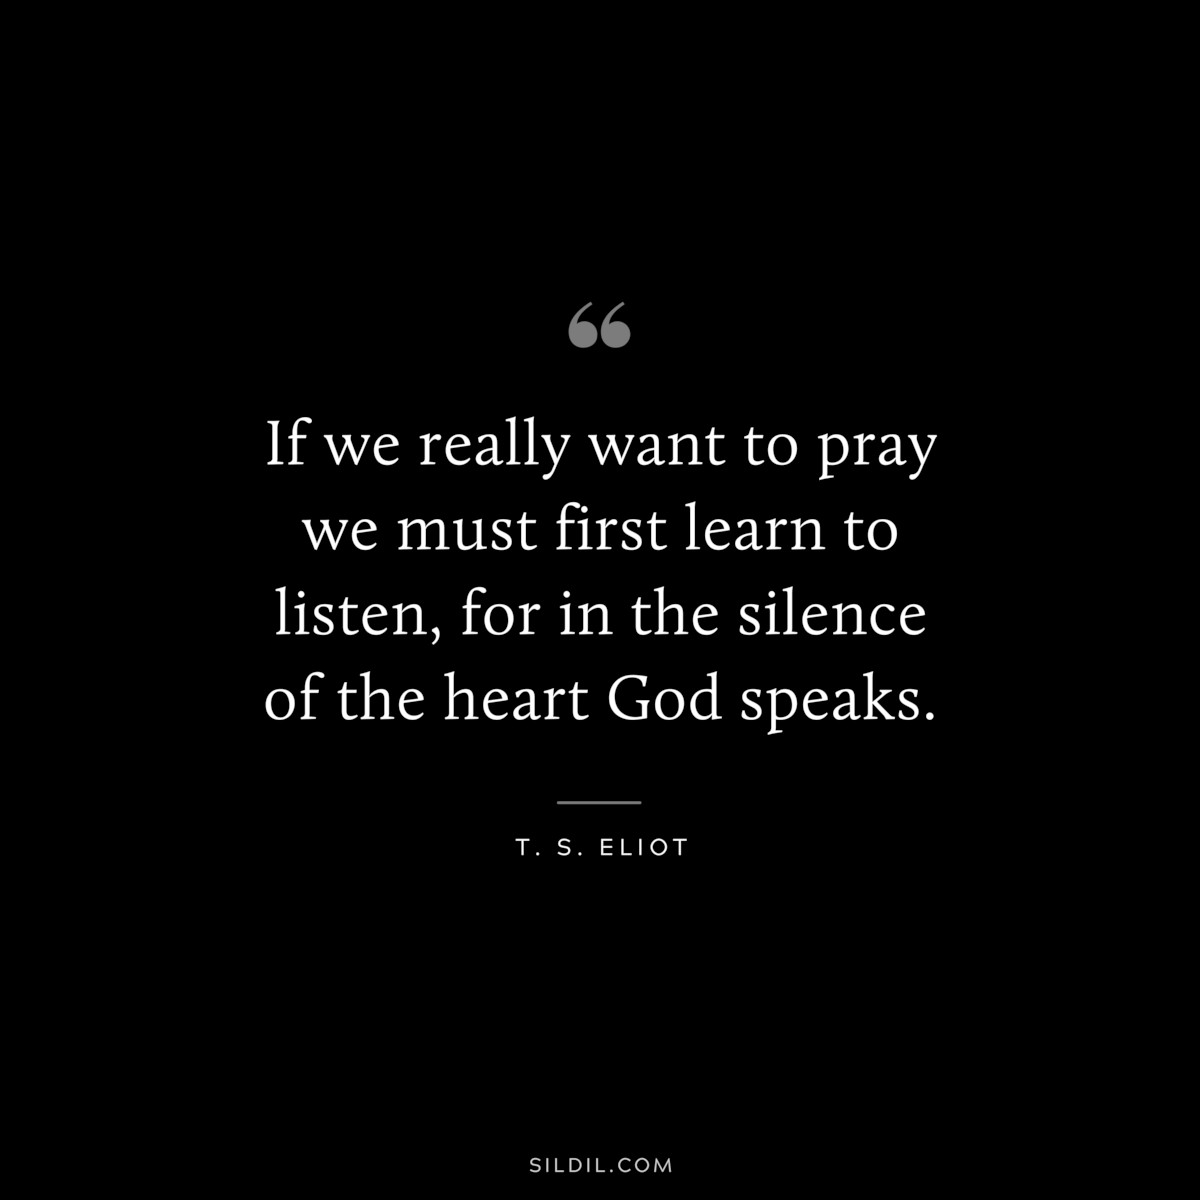 If we really want to pray we must first learn to listen, for in the silence of the heart God speaks. ― T. S. Eliot